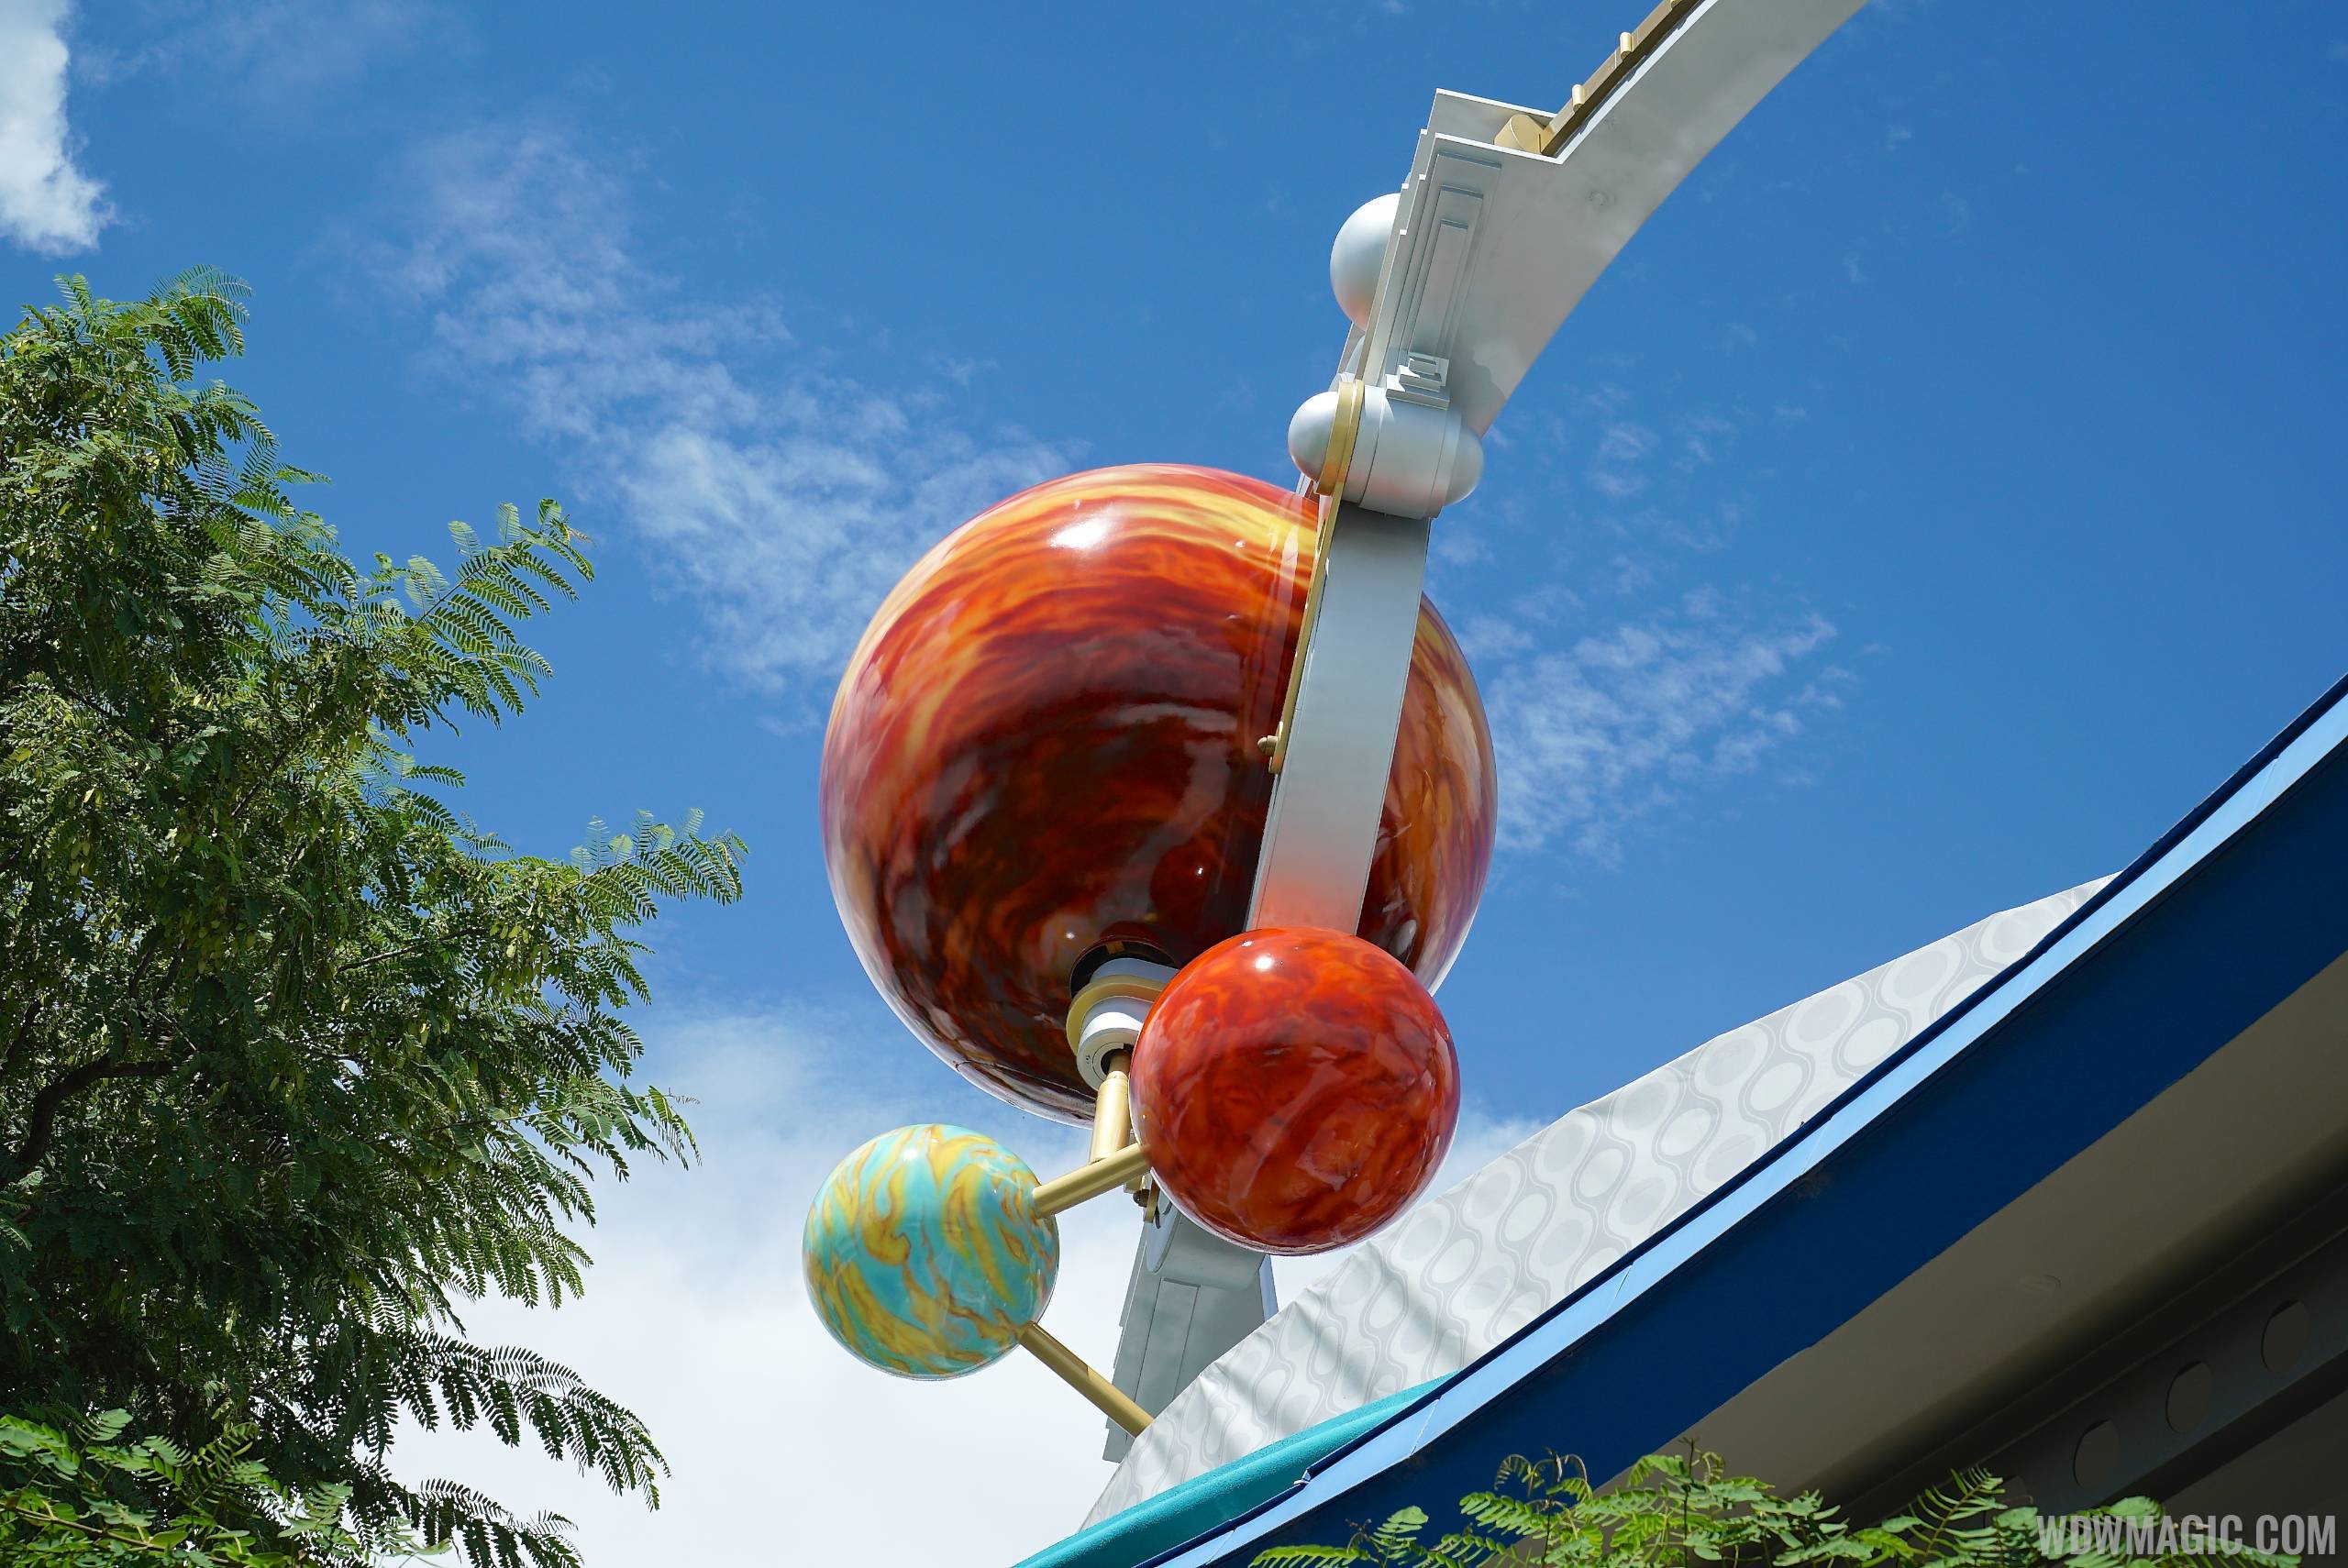 PHOTOS - Planets return to the Astro Orbitor as refurbishment continues